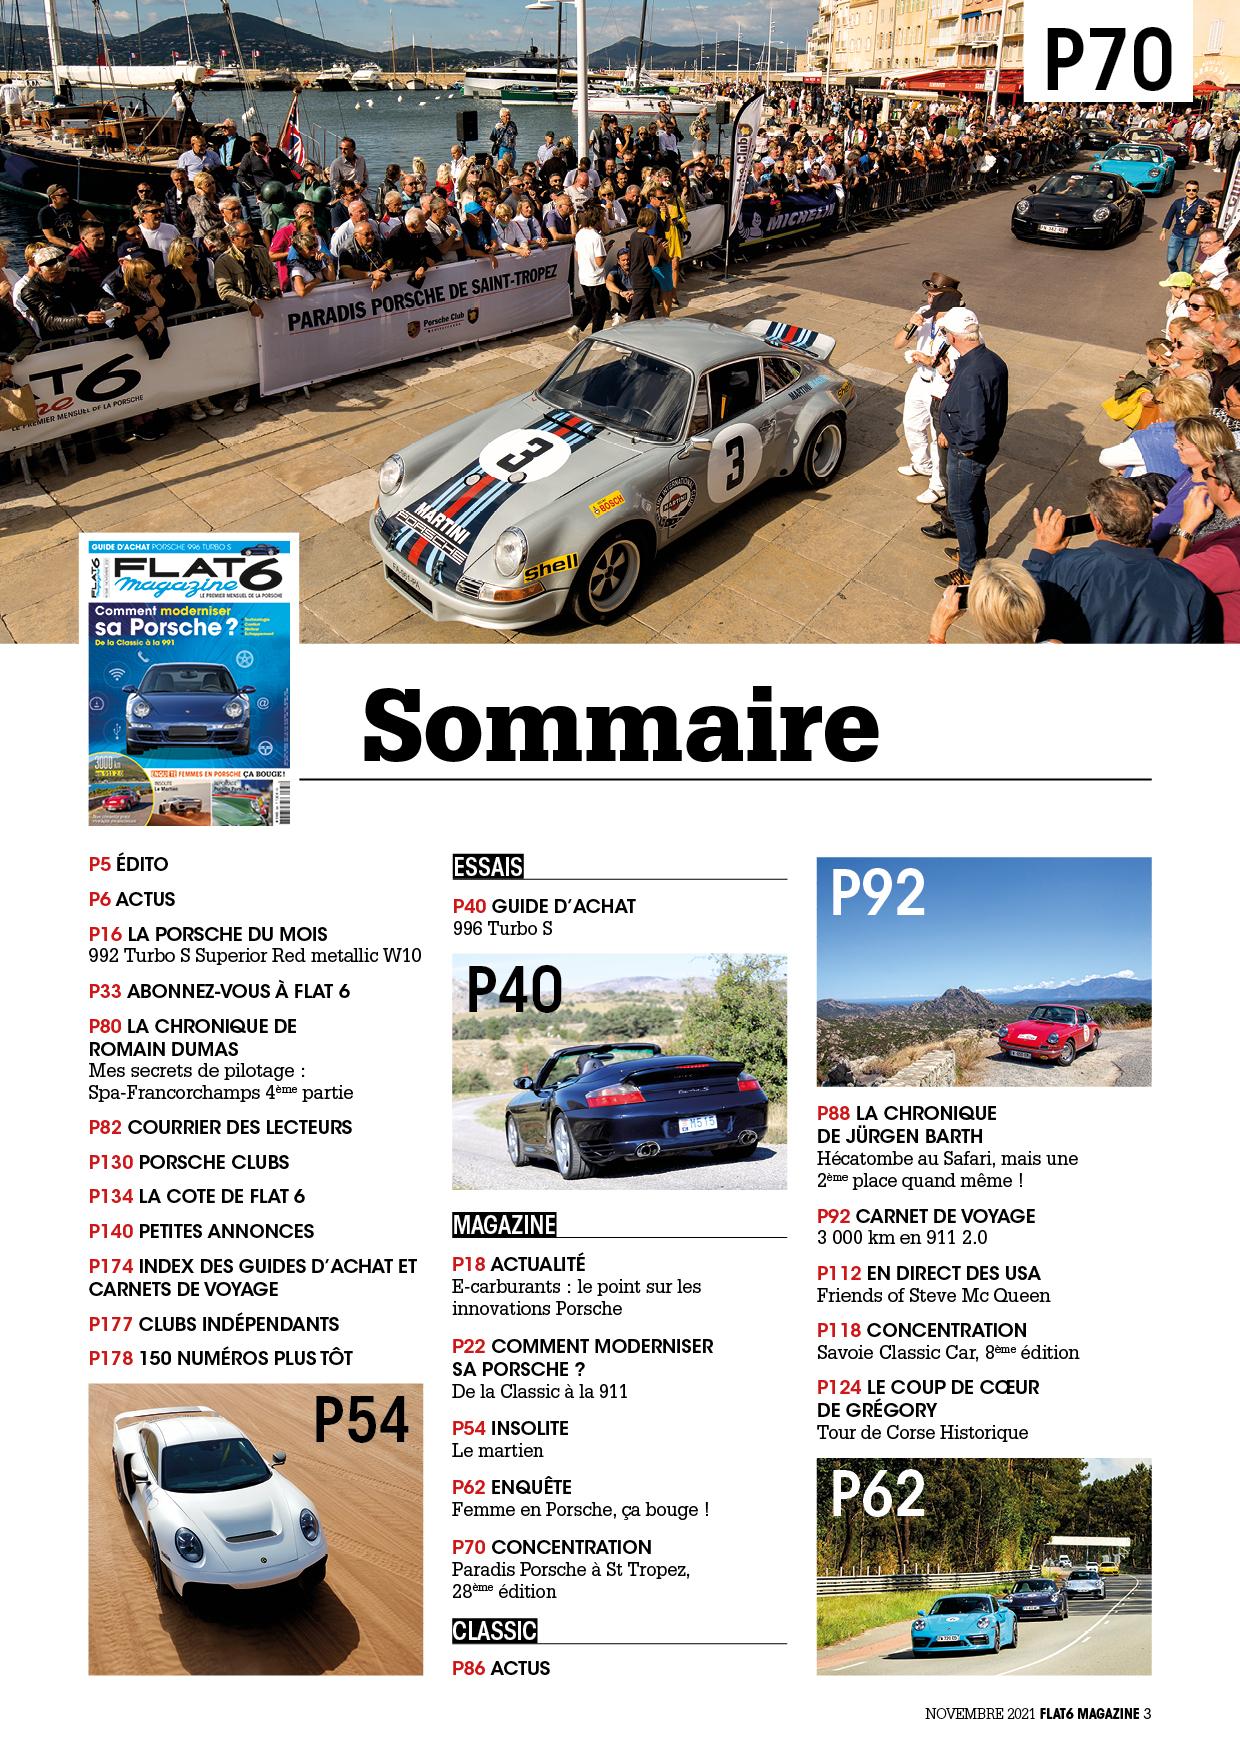 Sommaire368